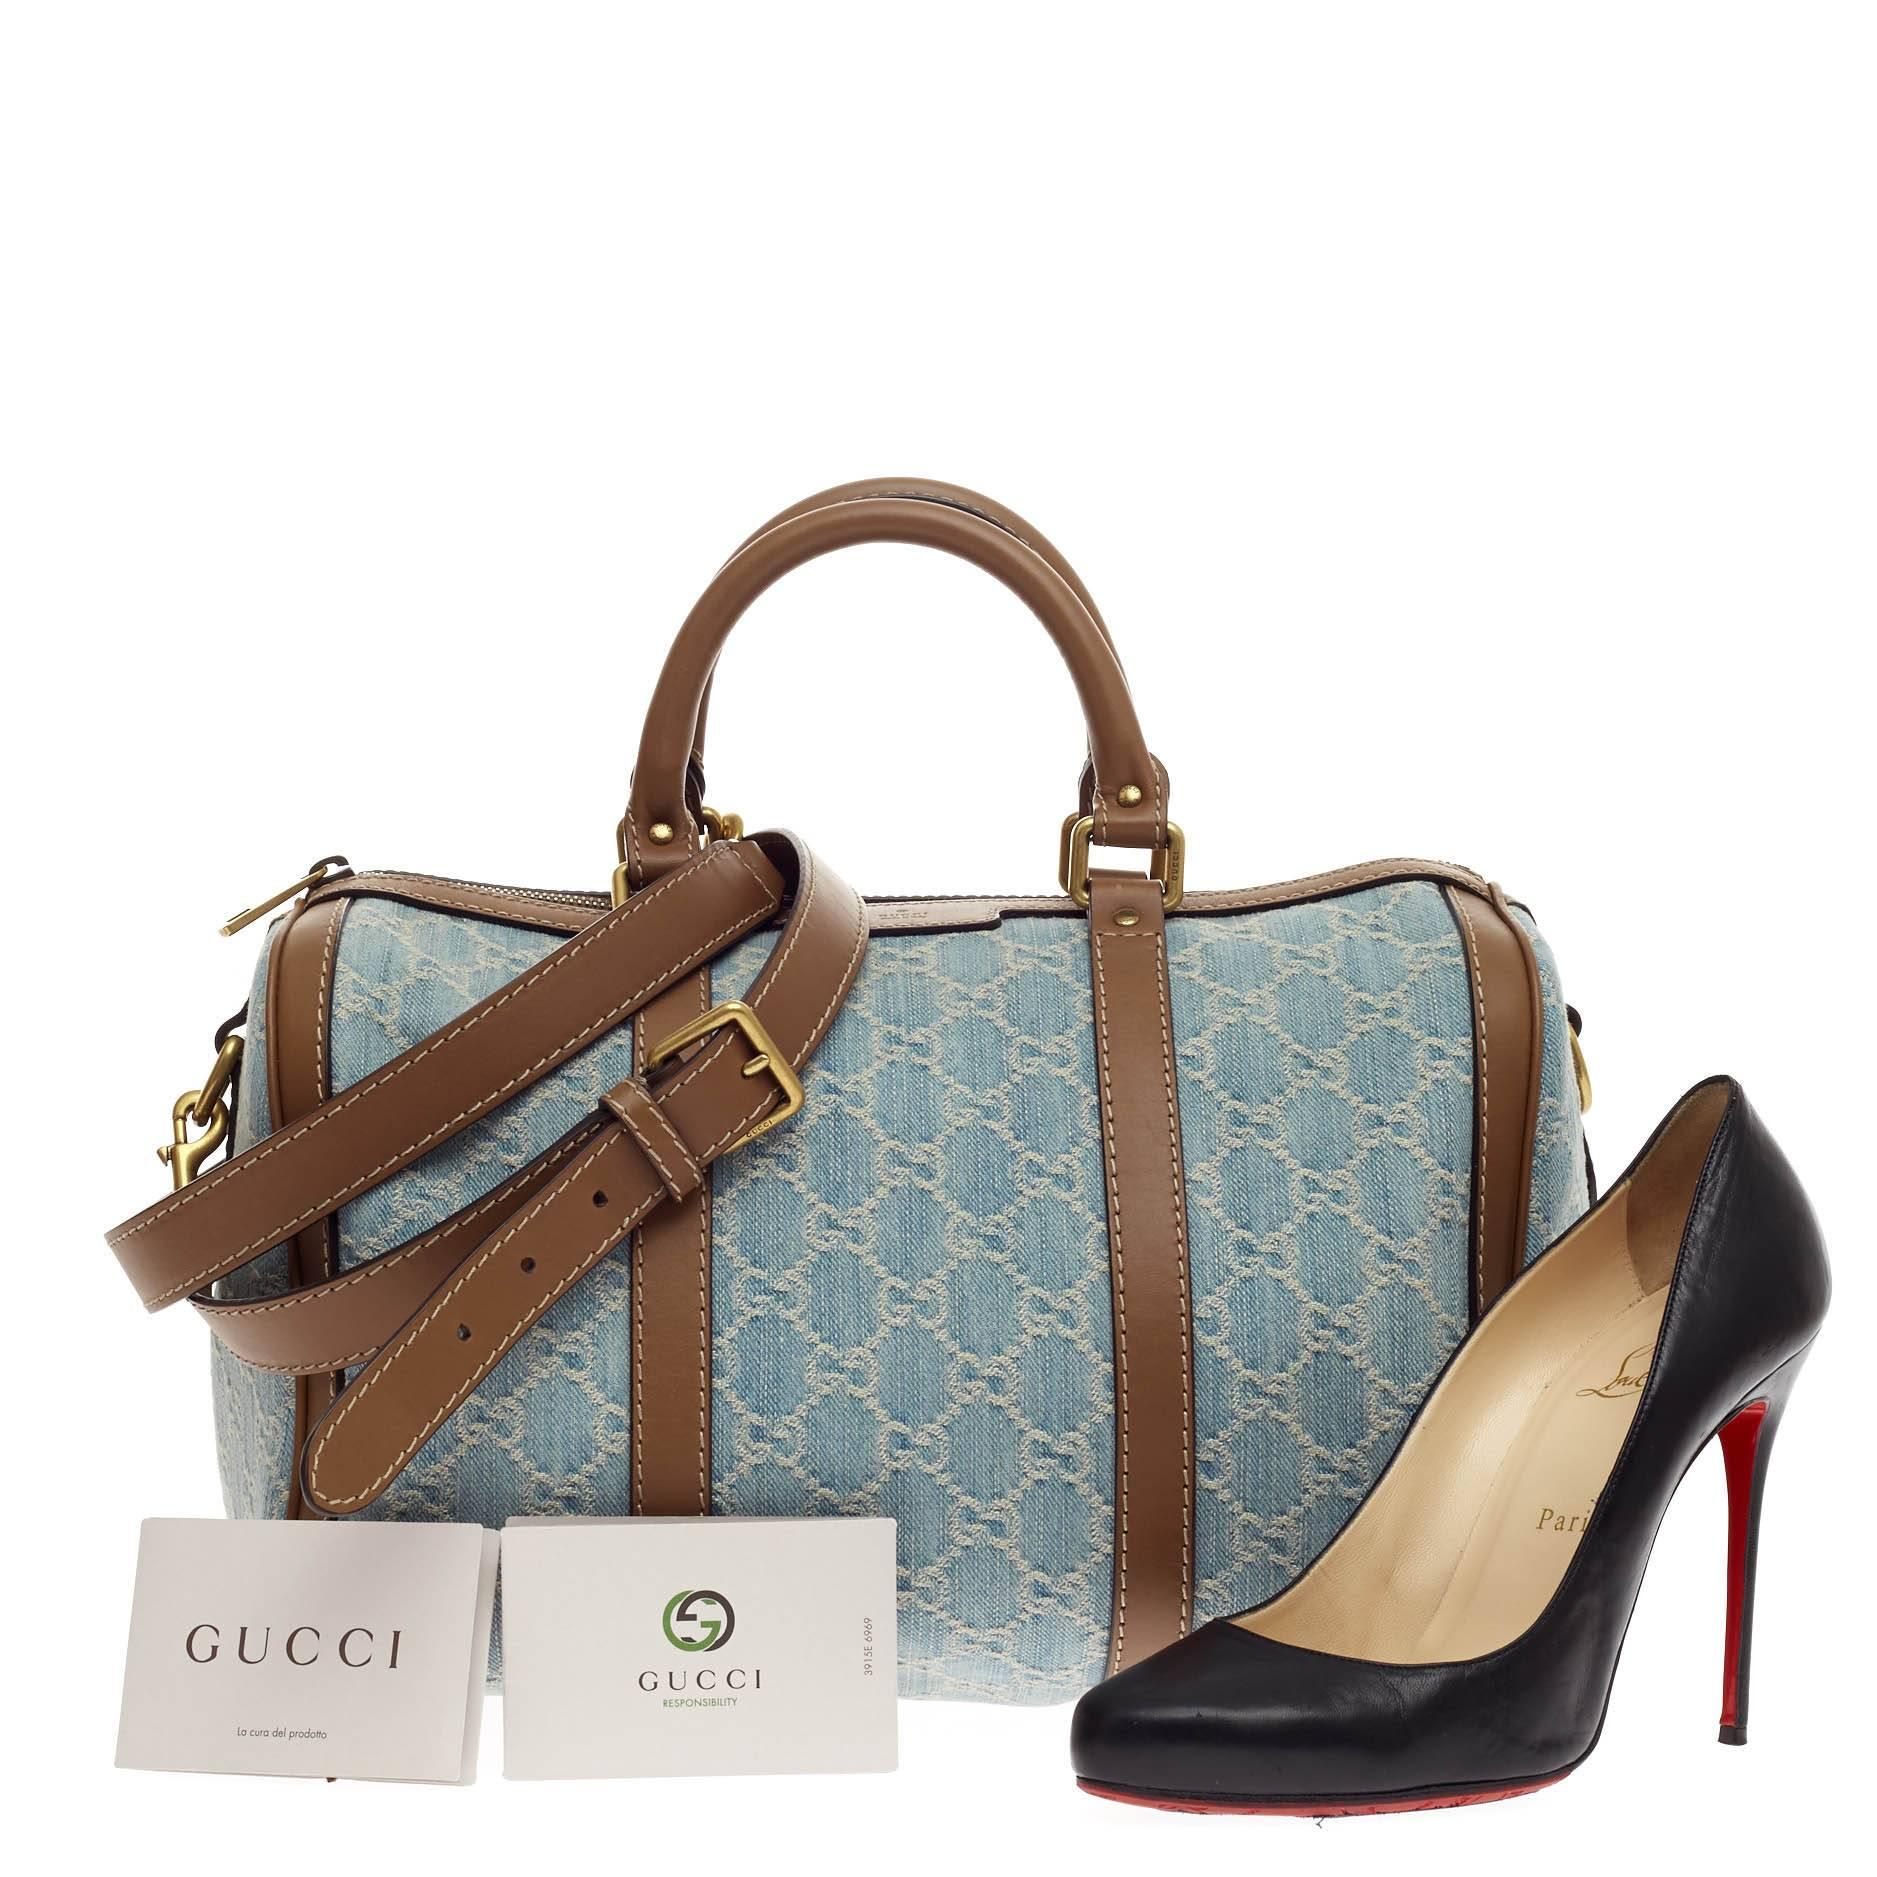 This authentic Gucci Joy Boston GG Denim Medium is a simple and stylish companion perfect for daily excursions. Crafted from washed blue denim GG pattern with brown leather trims, this duffle bag features dual-rolled leather handles, protective base